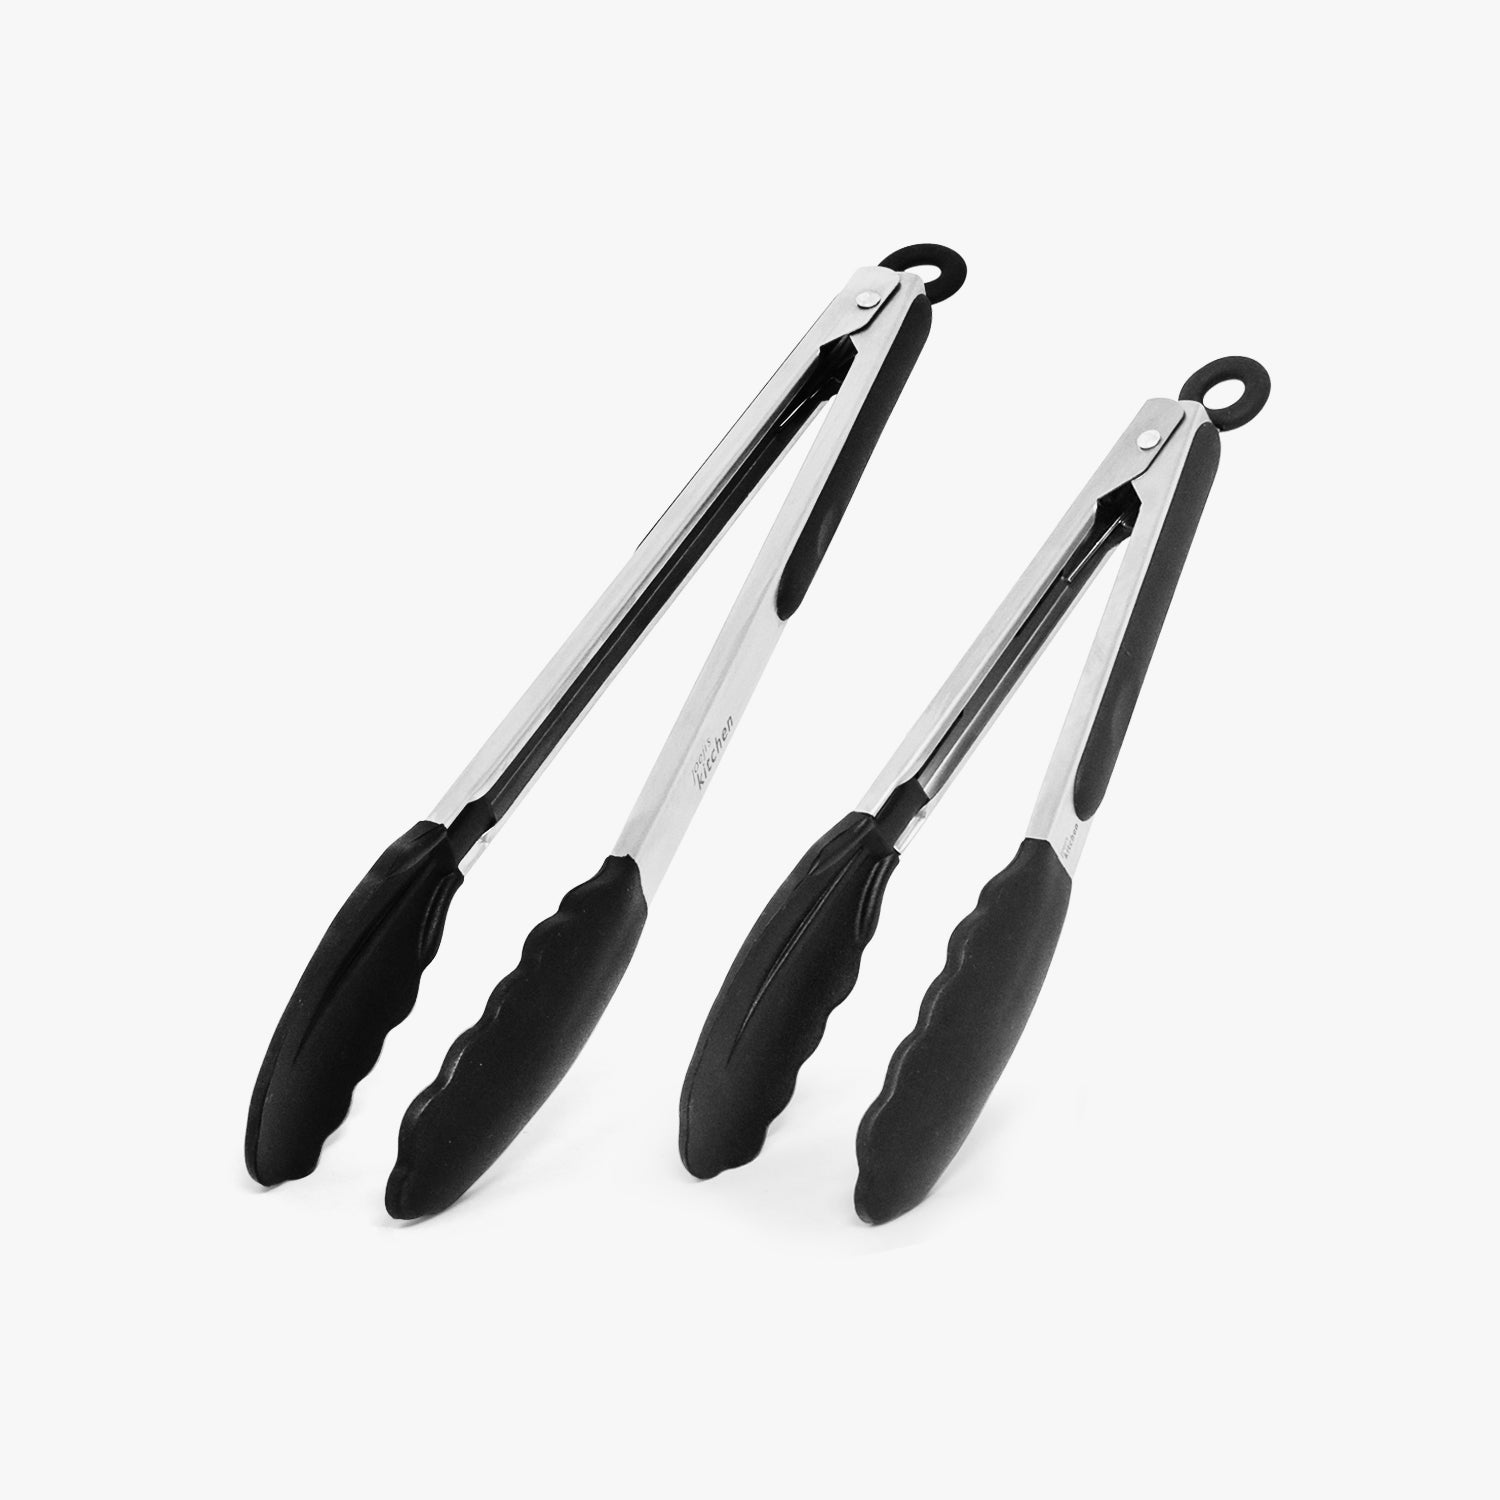 Rippl Kitchen Tongs Set - Tongs for Cooking, Grilling Tongs, Barbecue Tongs  (BBQ) - 12 inch Cooking Utensils with Silicone Tips & Grip - Set of 2